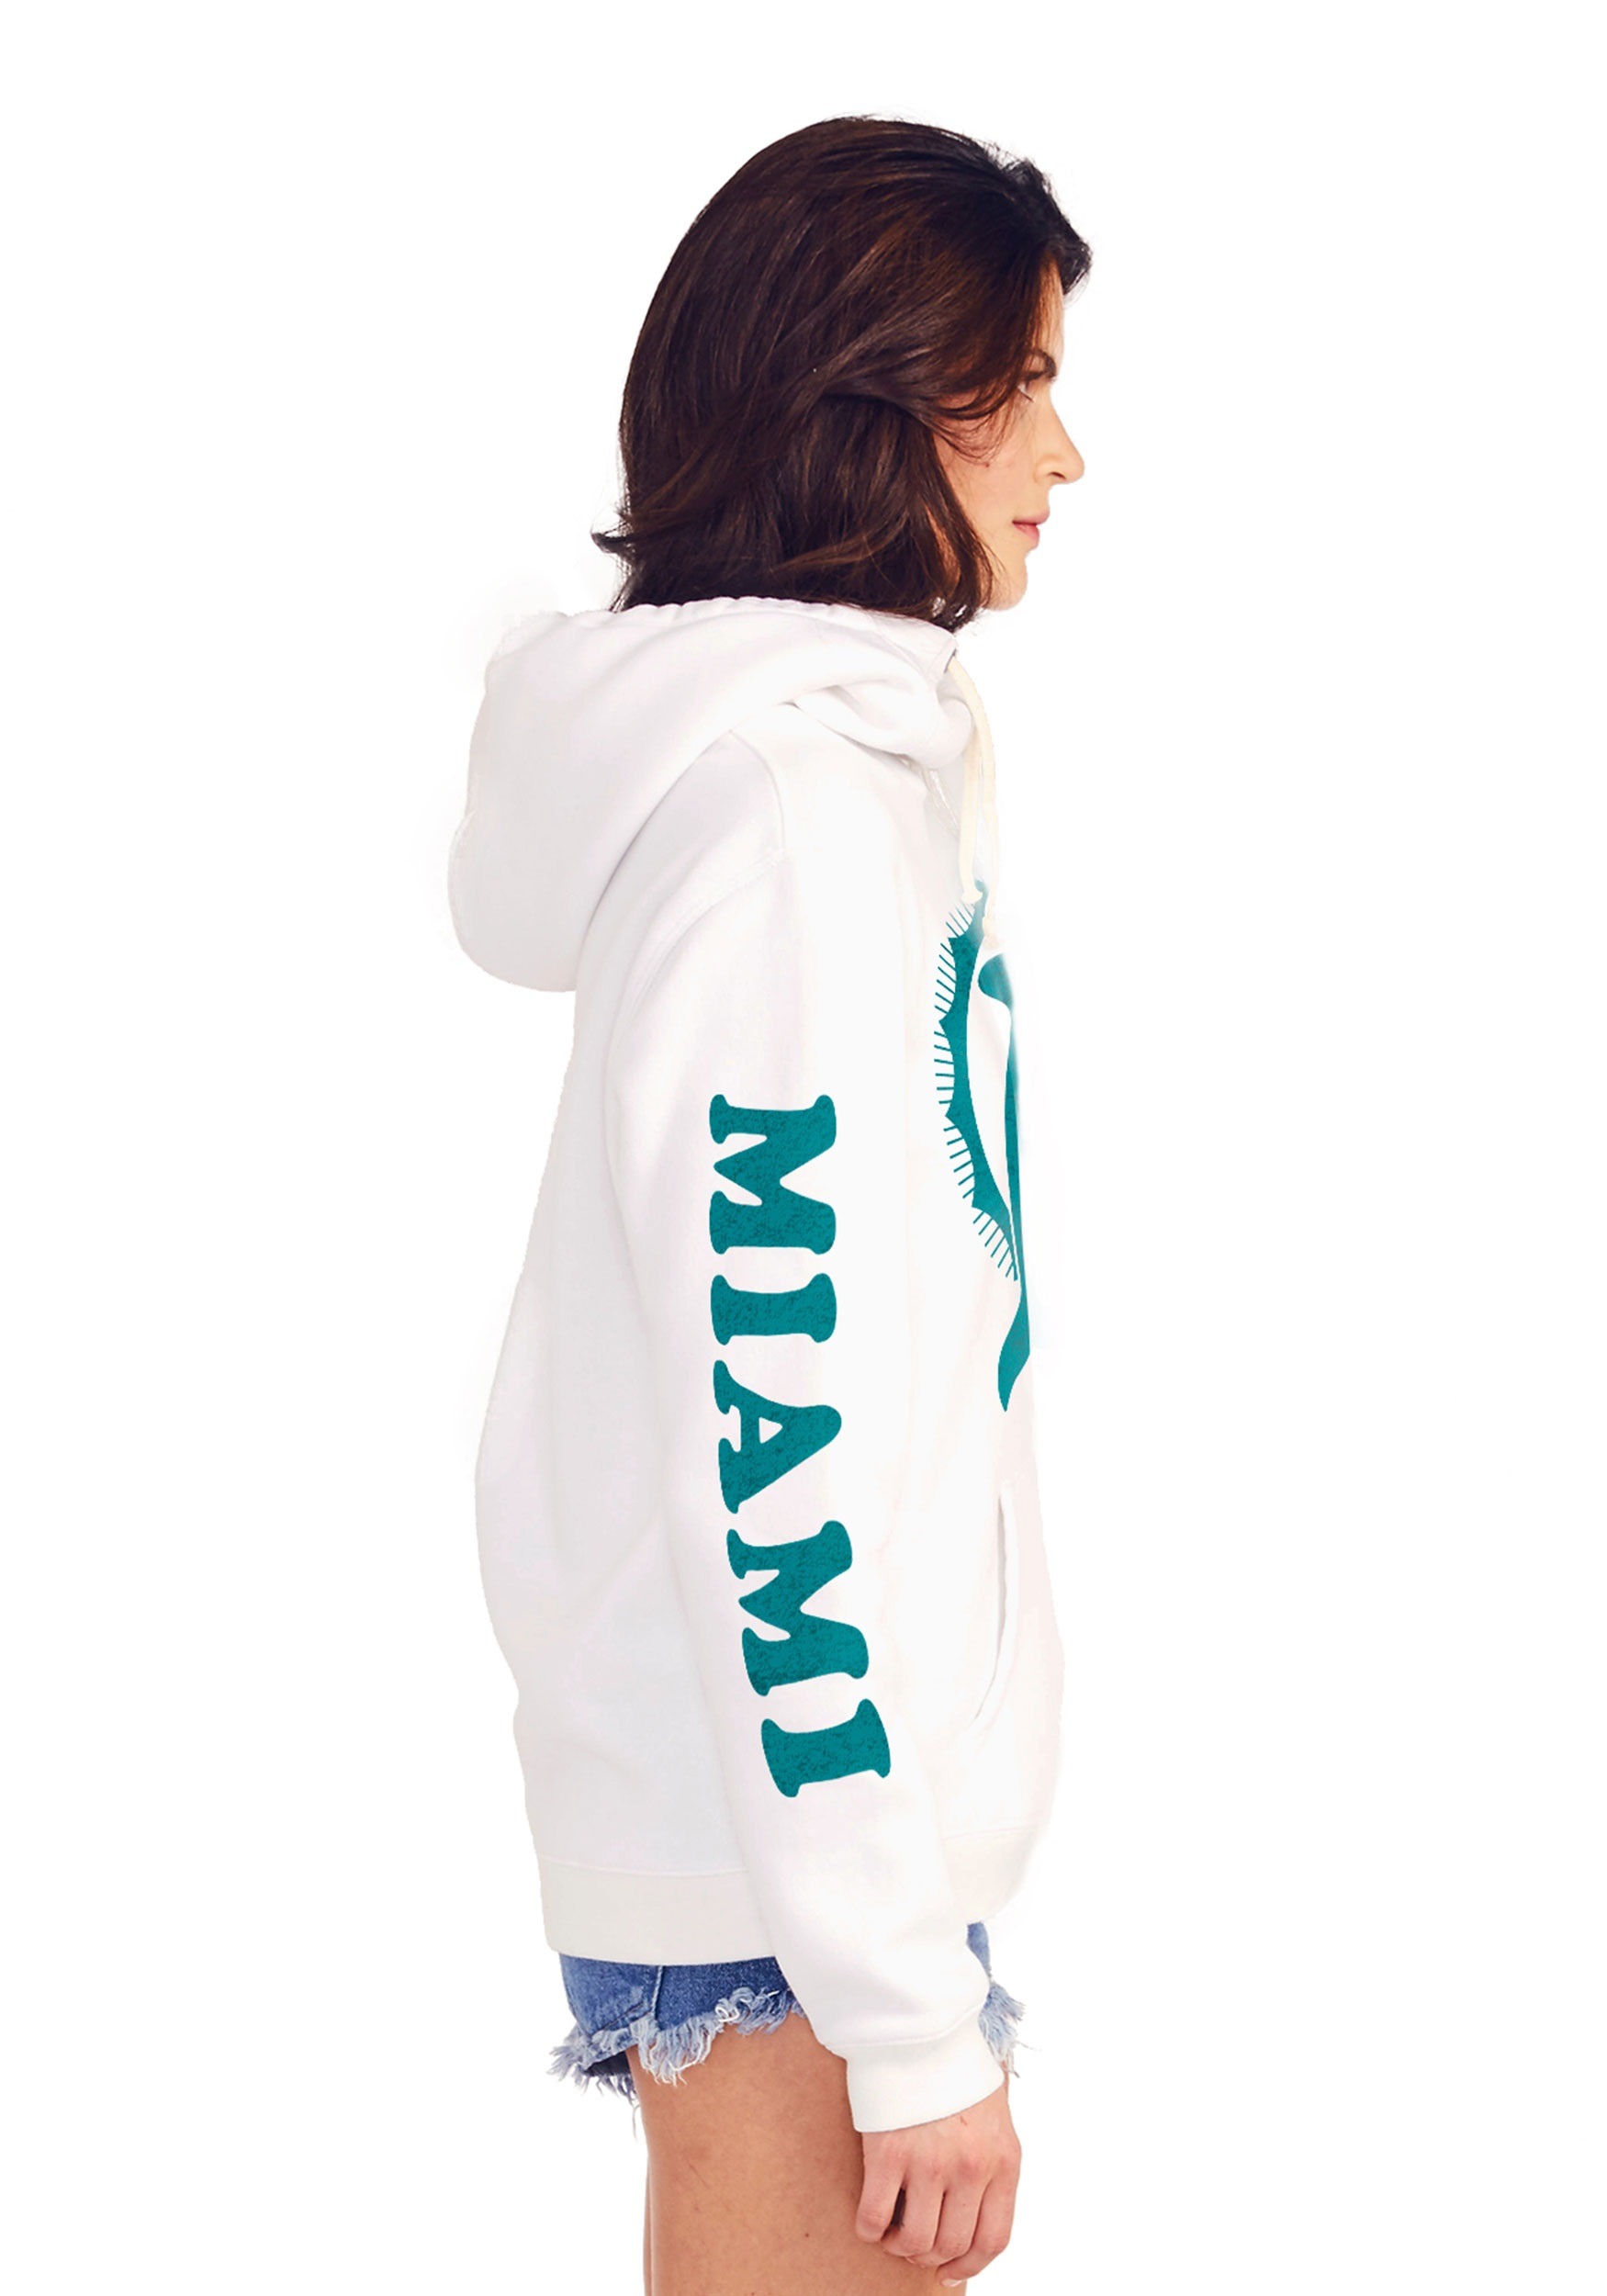 Miami Dolphins Women's Cowl Neck Hooded 